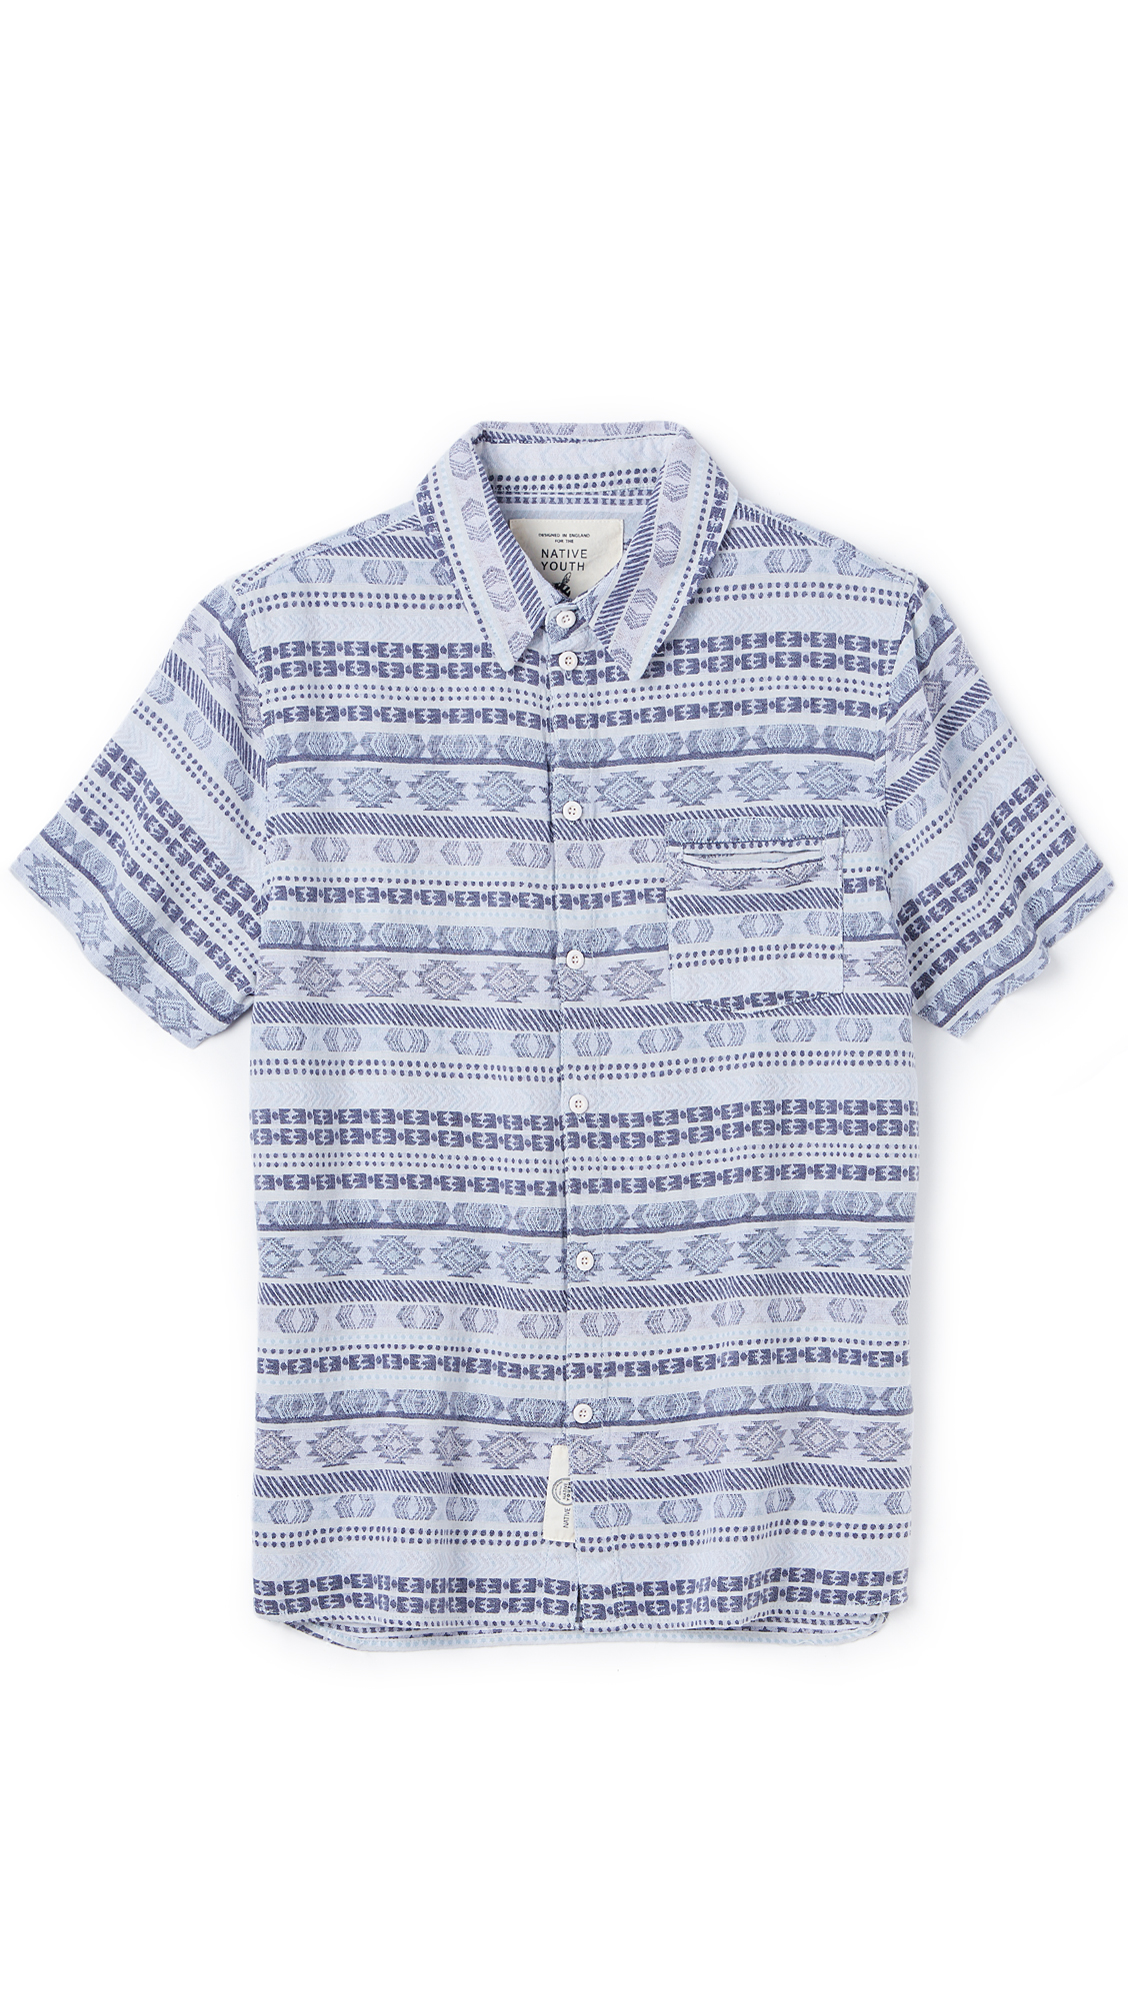 Lyst - Native youth Tapestry Jacquard Shirt in Blue for Men